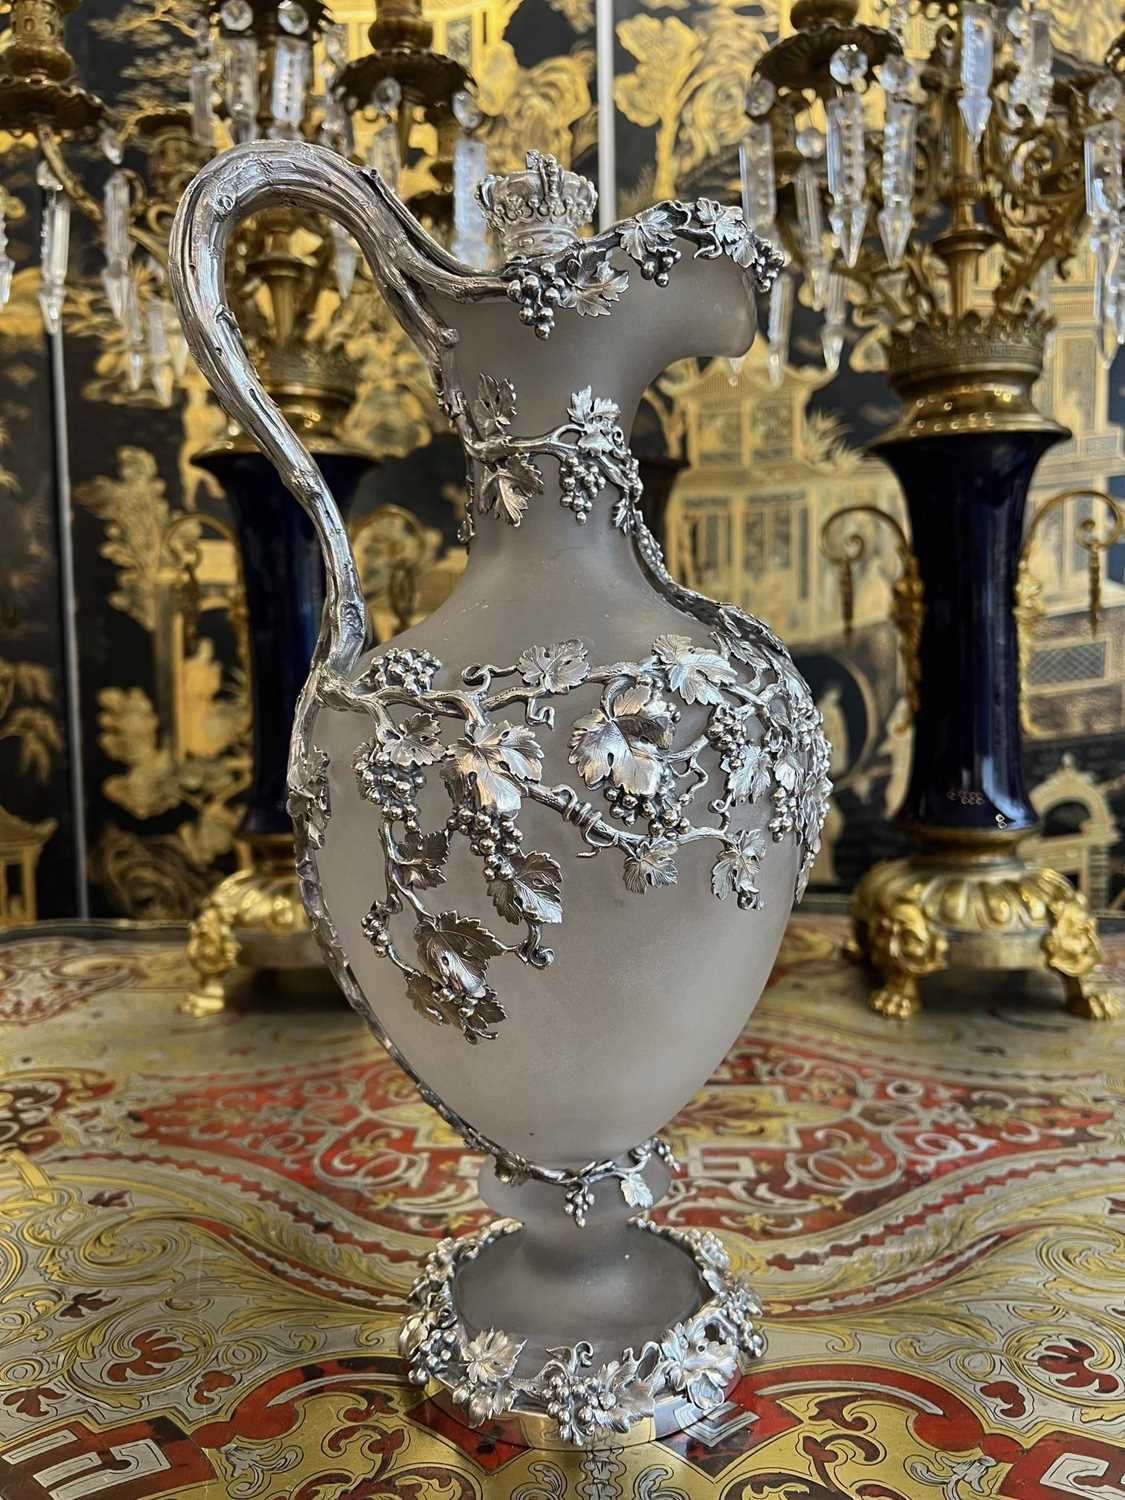 A MAGNIFICENT STERLING SILVER AND FROSTED GLASS CLARET JUG BY MORTIMER & HUNT, 1843 - Image 3 of 10